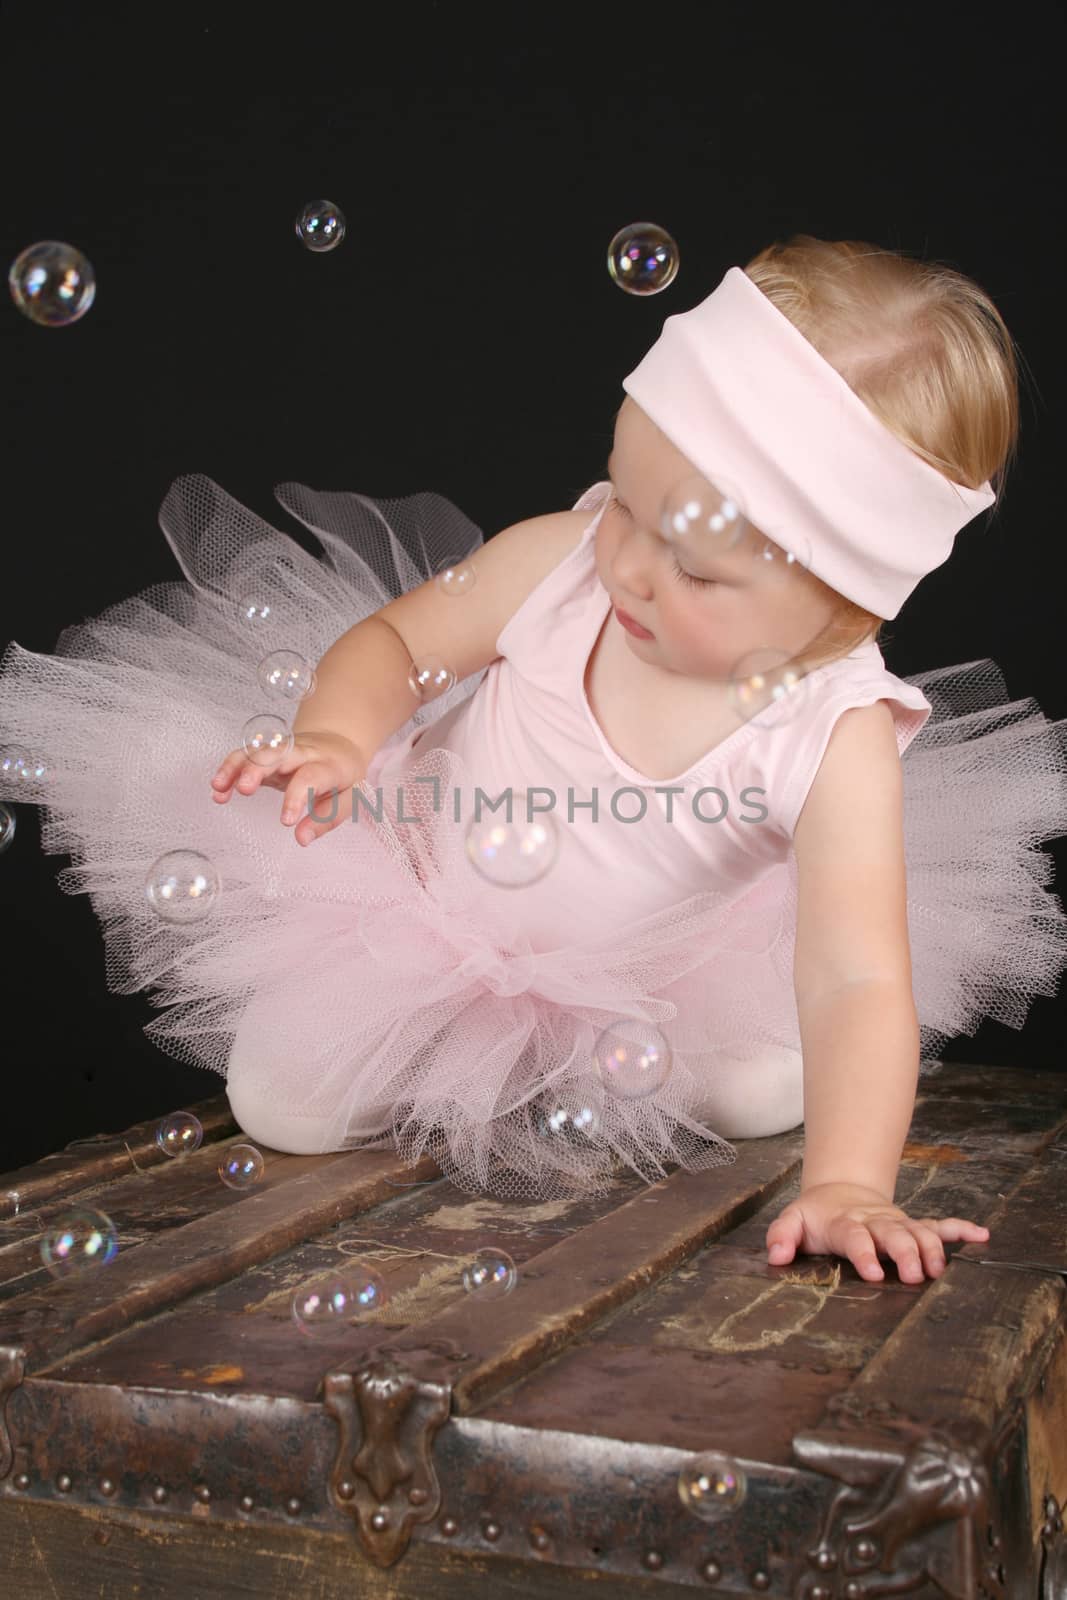 Ballet bubbles by vanell